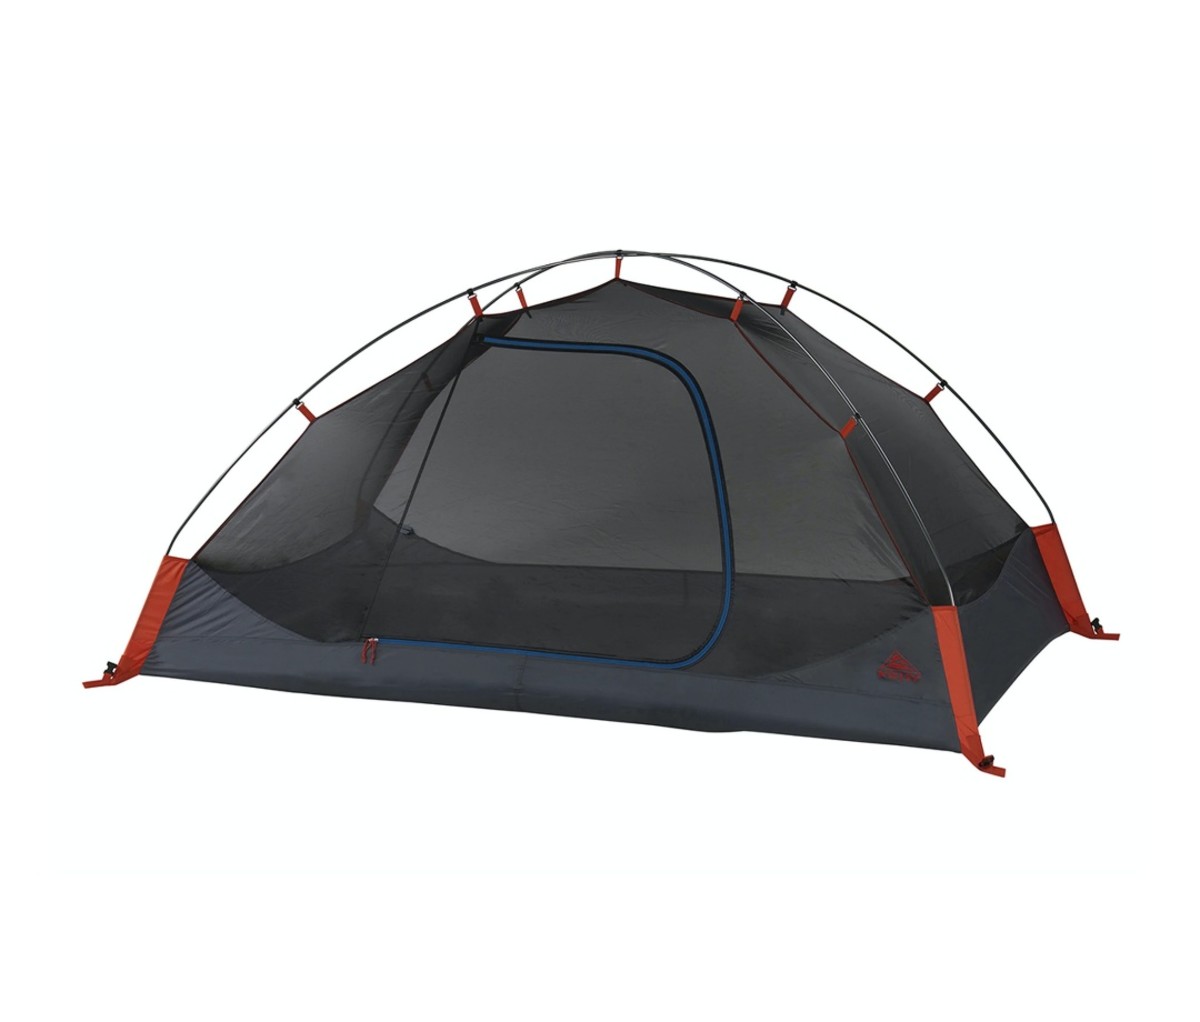 Kelty Late Start 2 camping tents